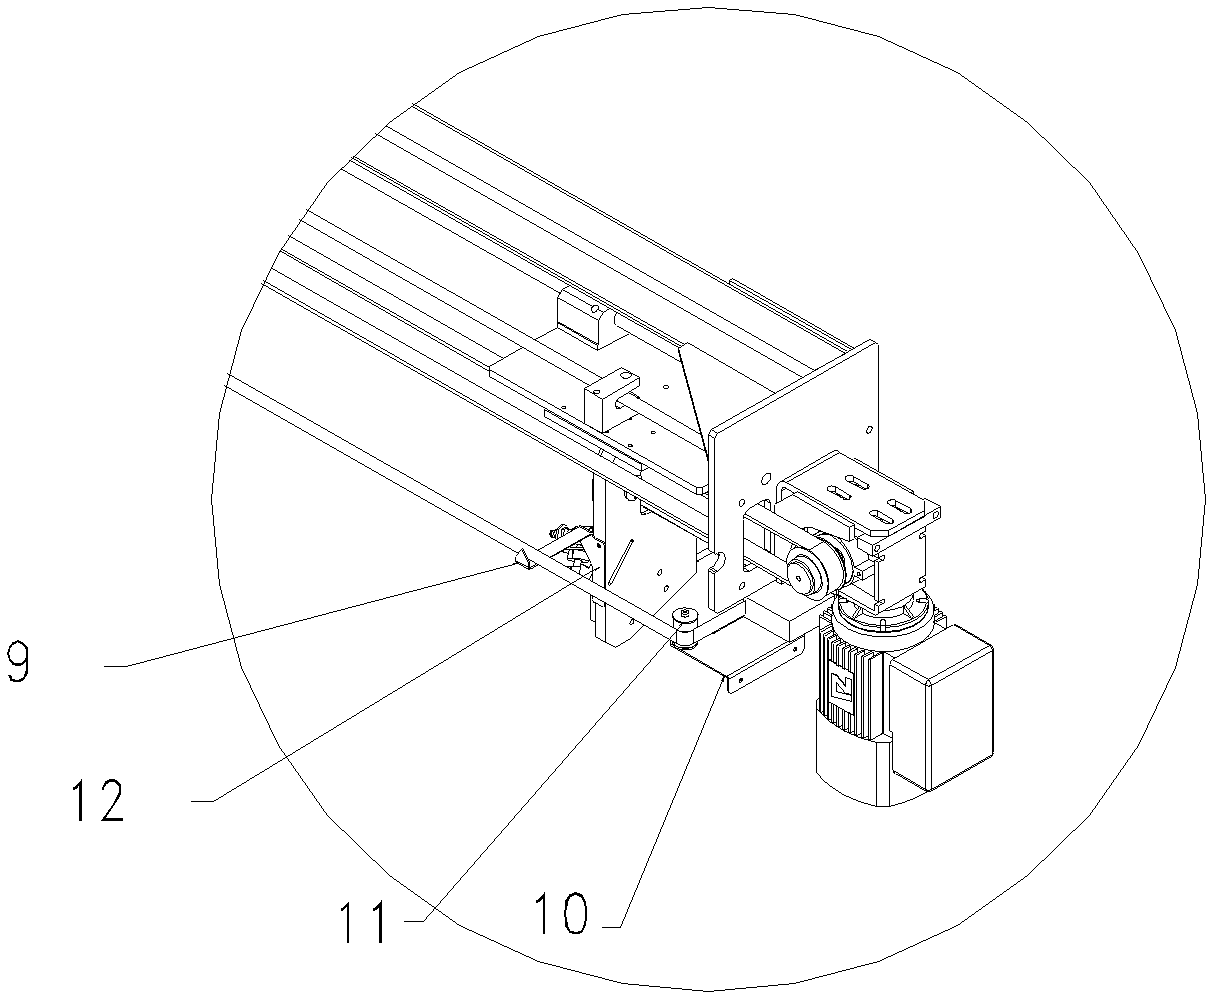 Automatic moving device for vertical cutting of cutting machine